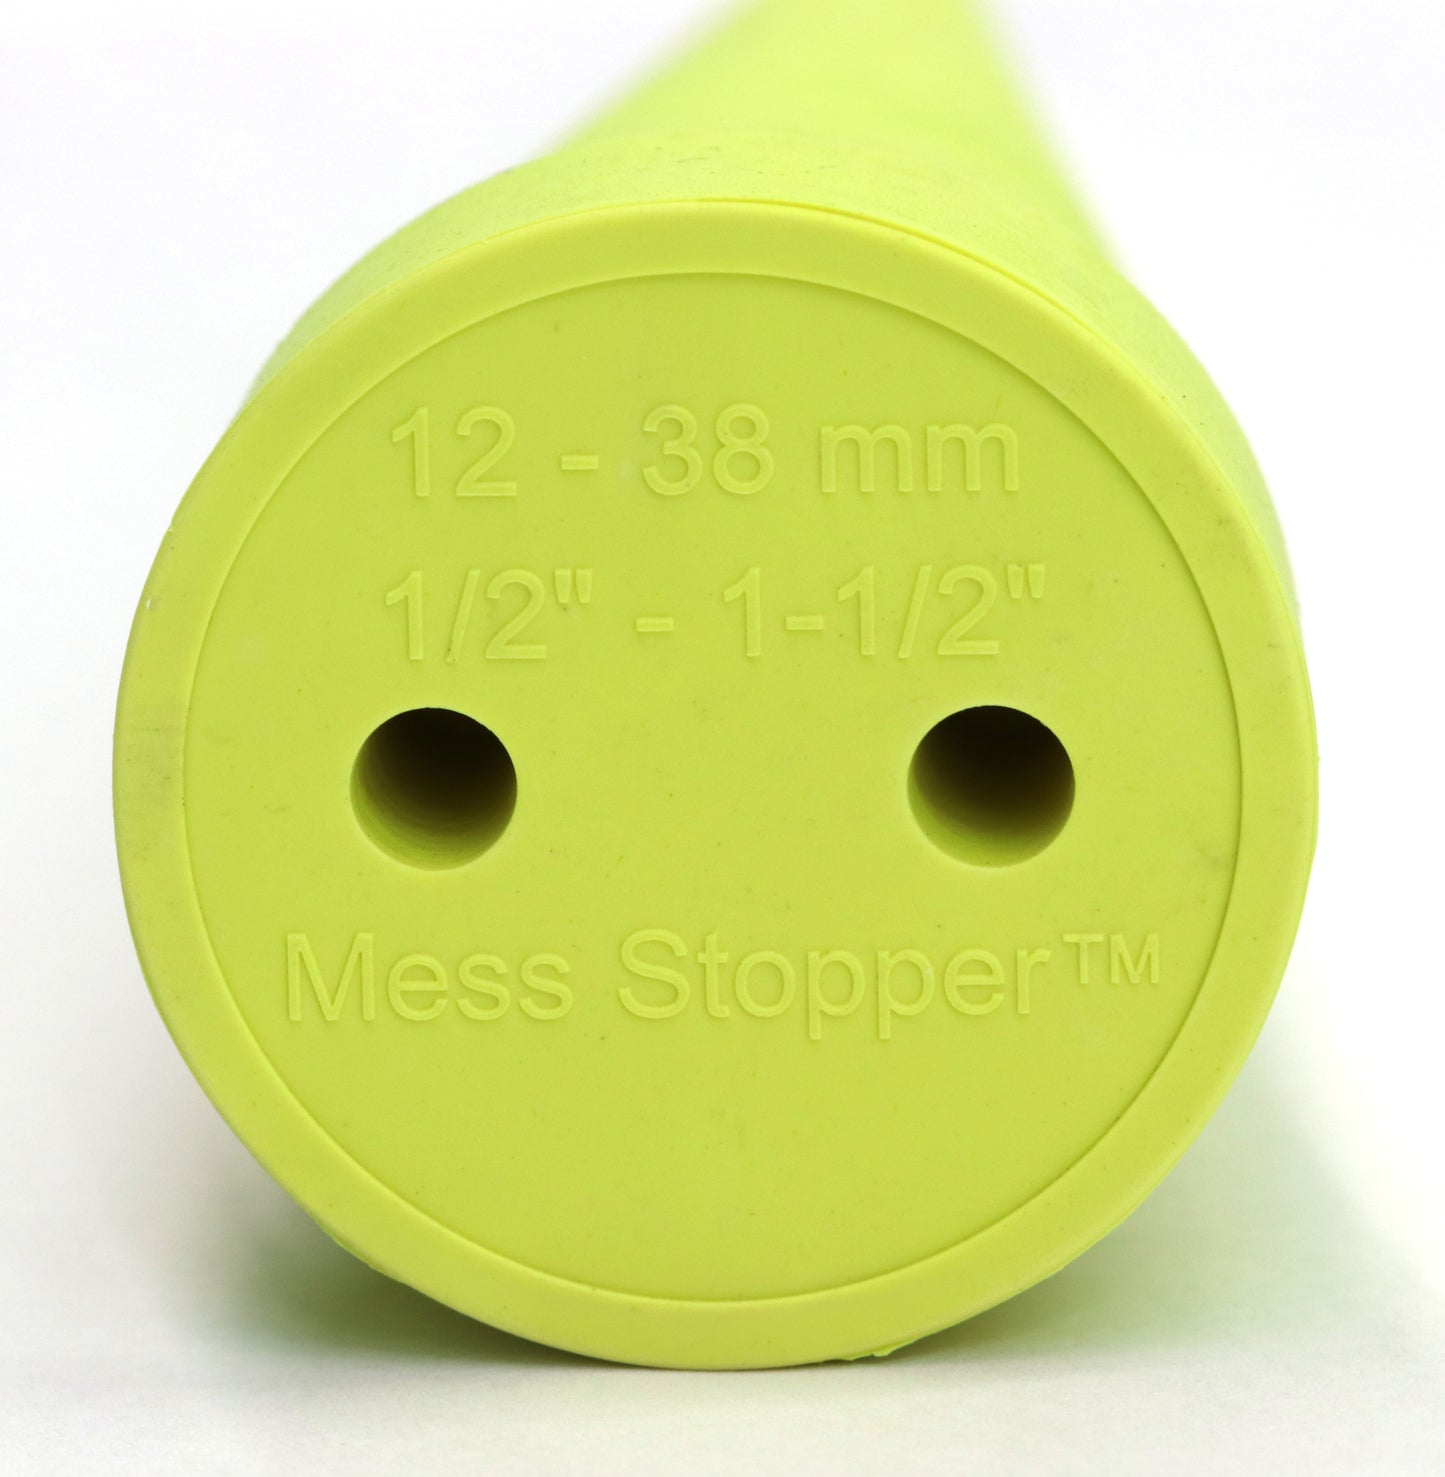 Mess Stopper™, 4 Large Size, Round